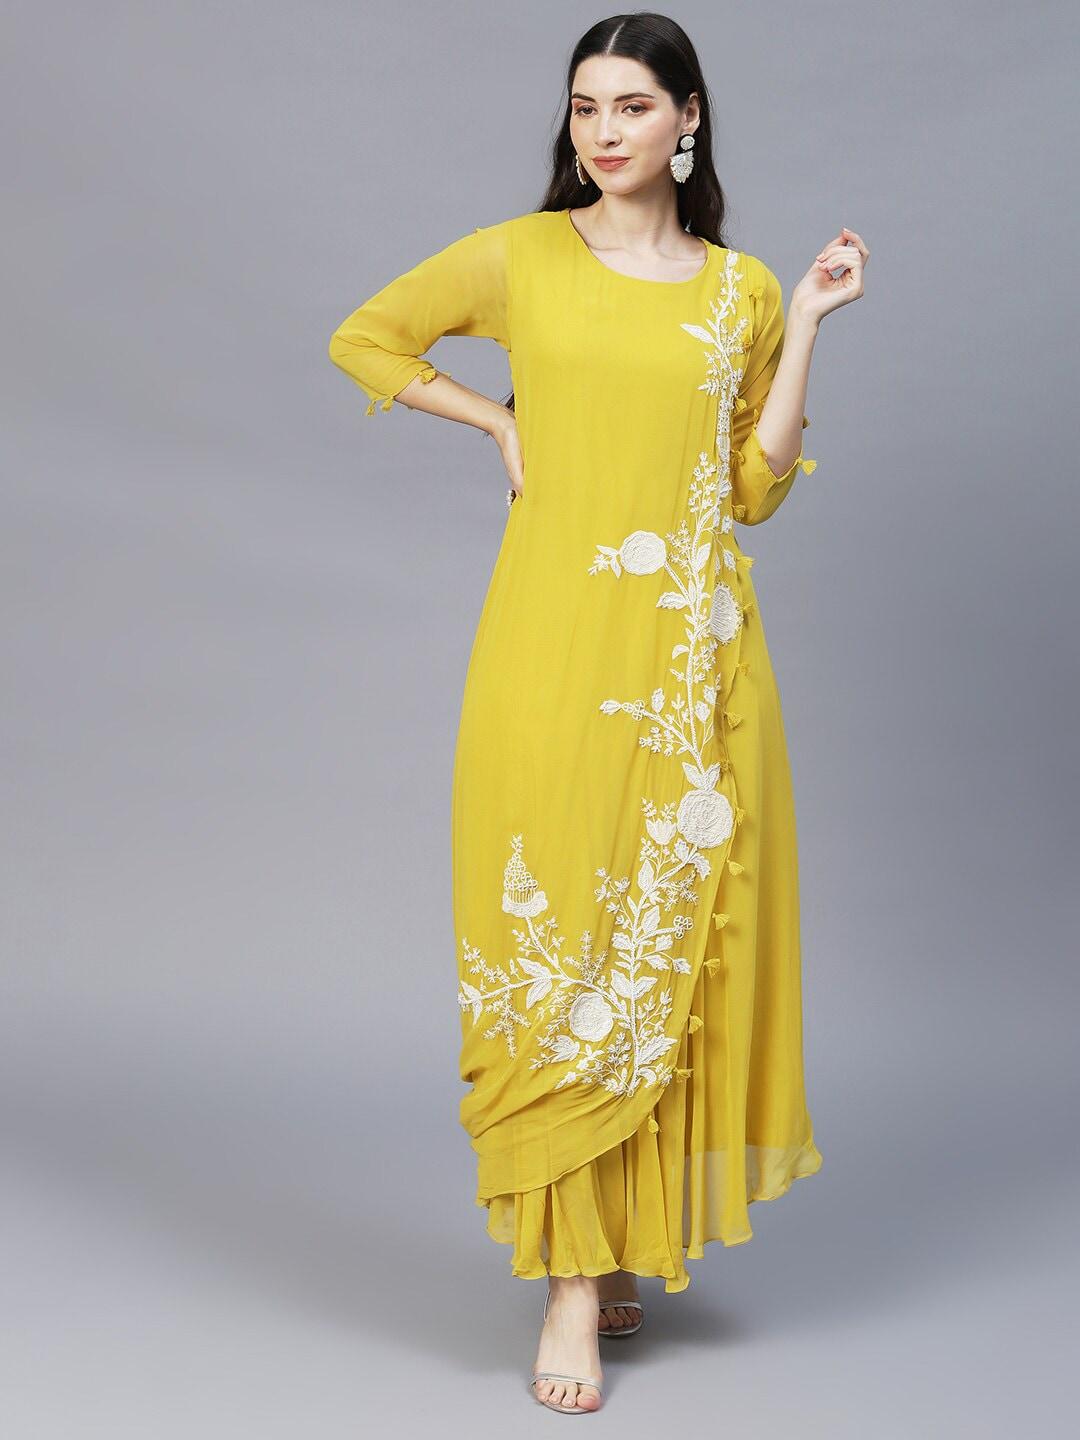 envy me by fashor mustard yellow floral embroidered georgette maxi dress